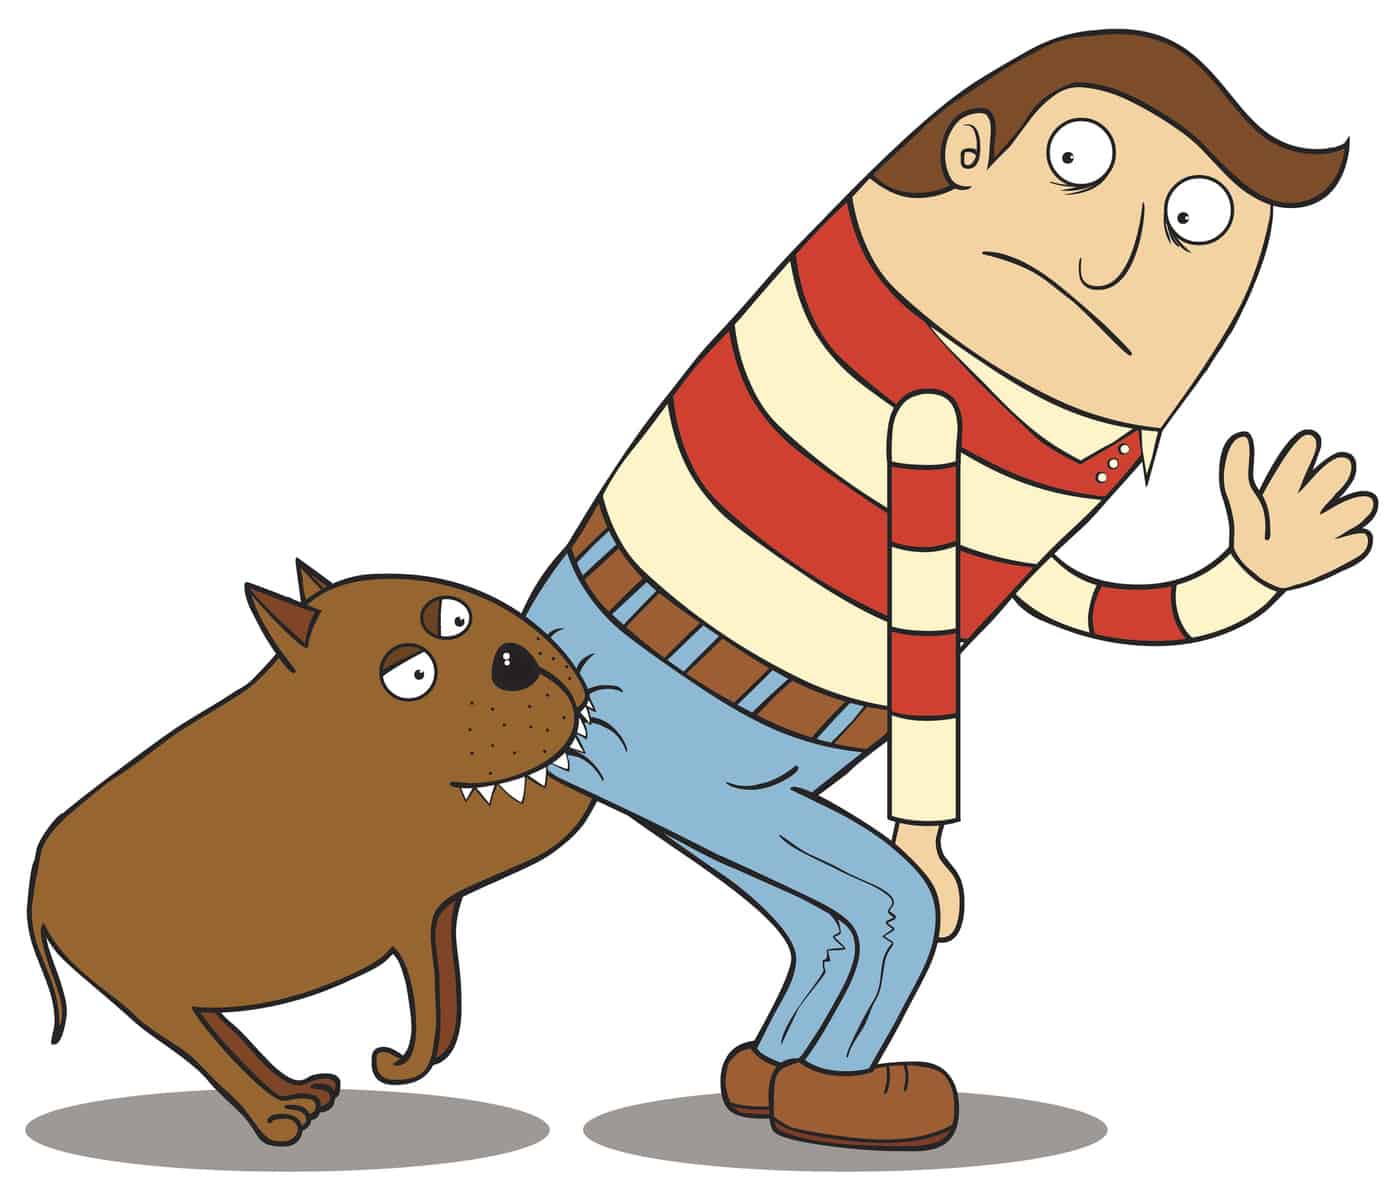 Cartoon of man bent over meanwhile his buttock bitten by dog.